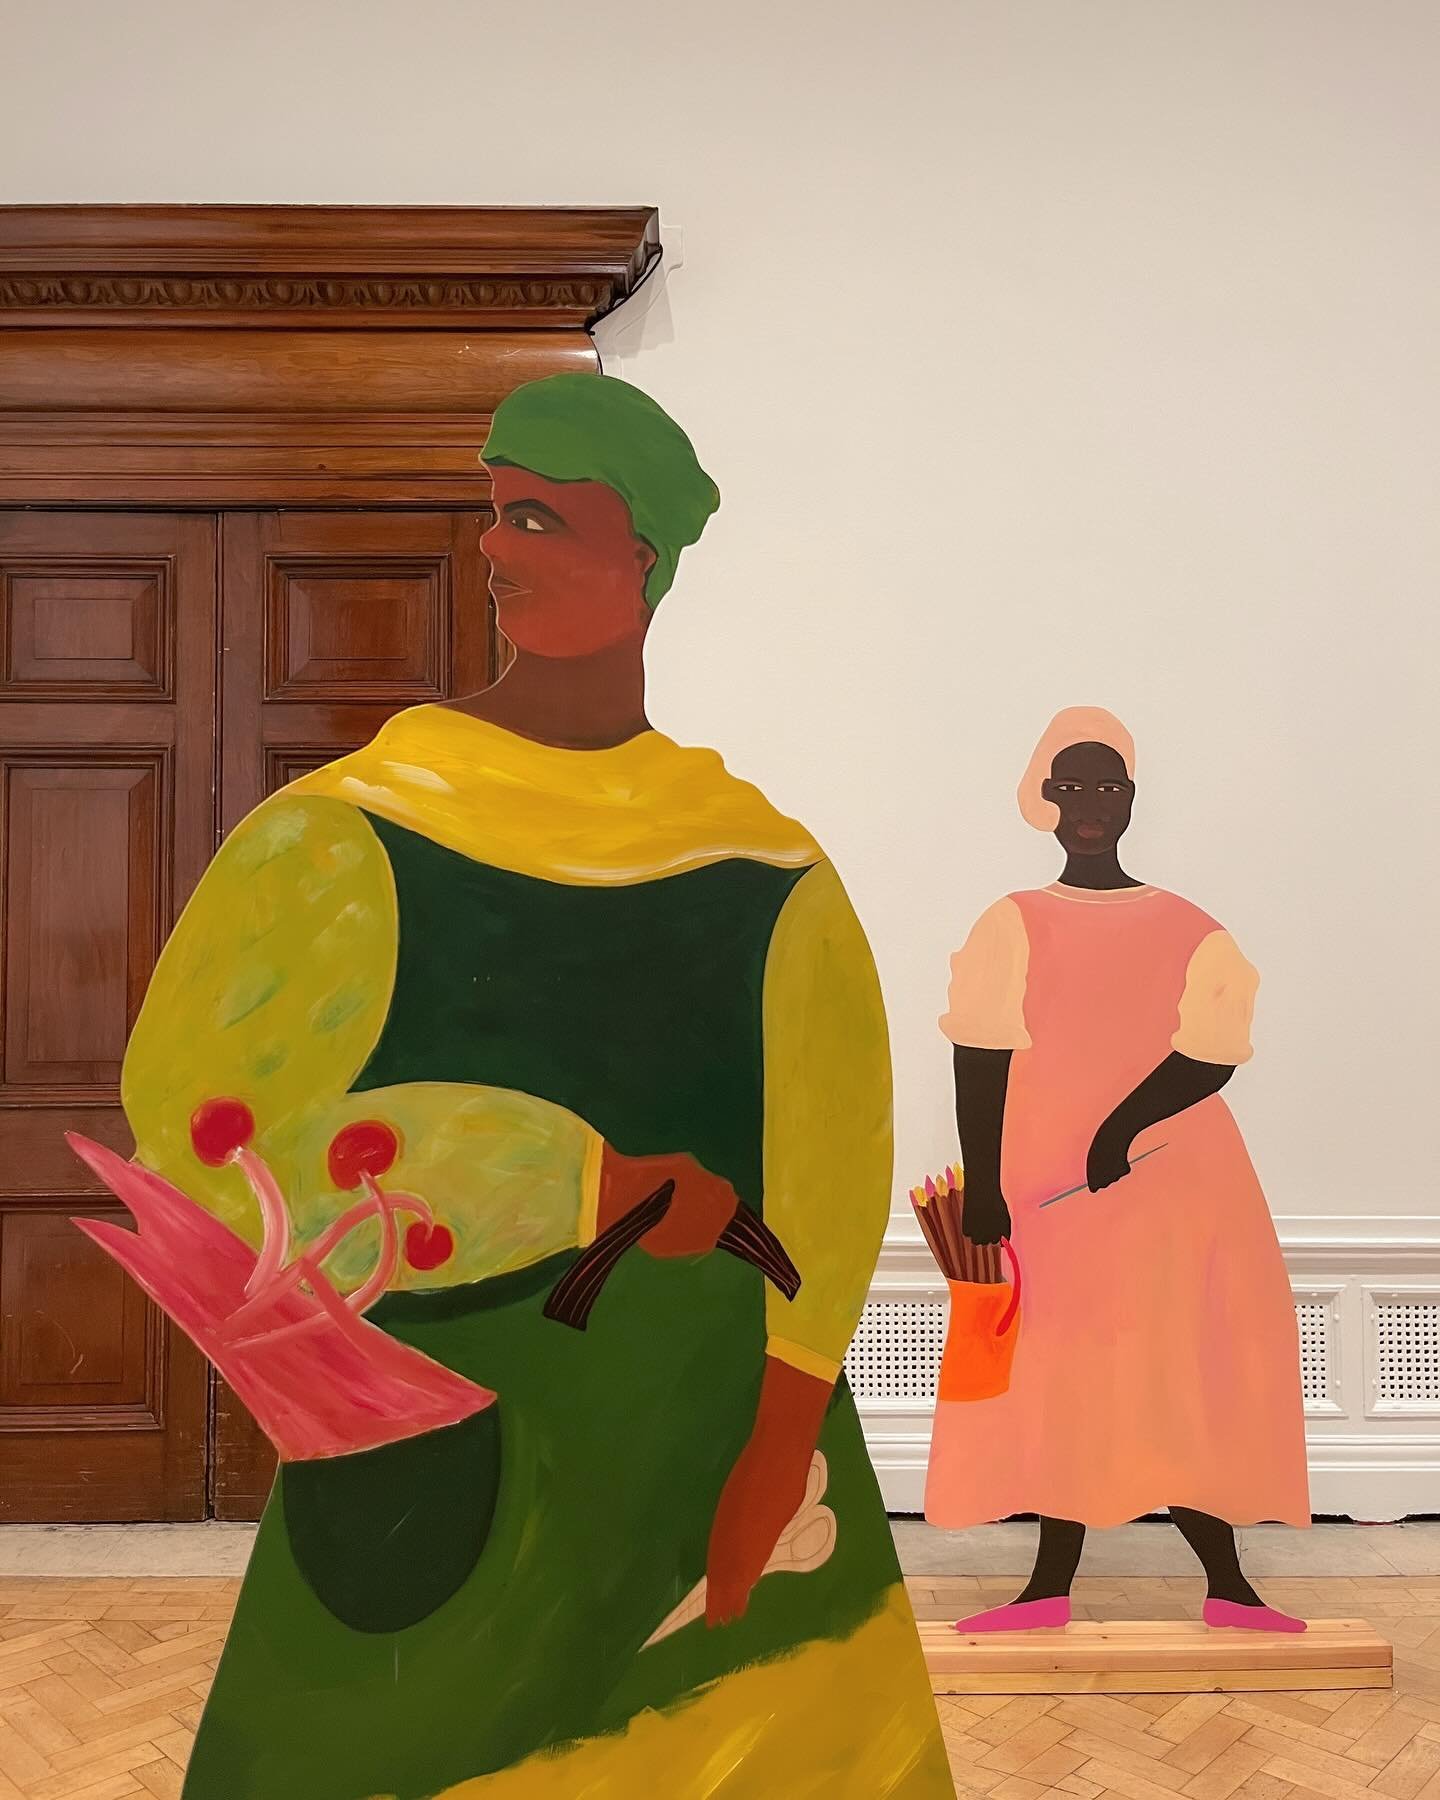 Last chance to visit Entangled Pasts at the Royal Academy, an enlightening collection of works challenging colonial history and contemporary responses. It ends with the wonderful Lubaina Himid installation Naming the Money which won the Turner Prize.